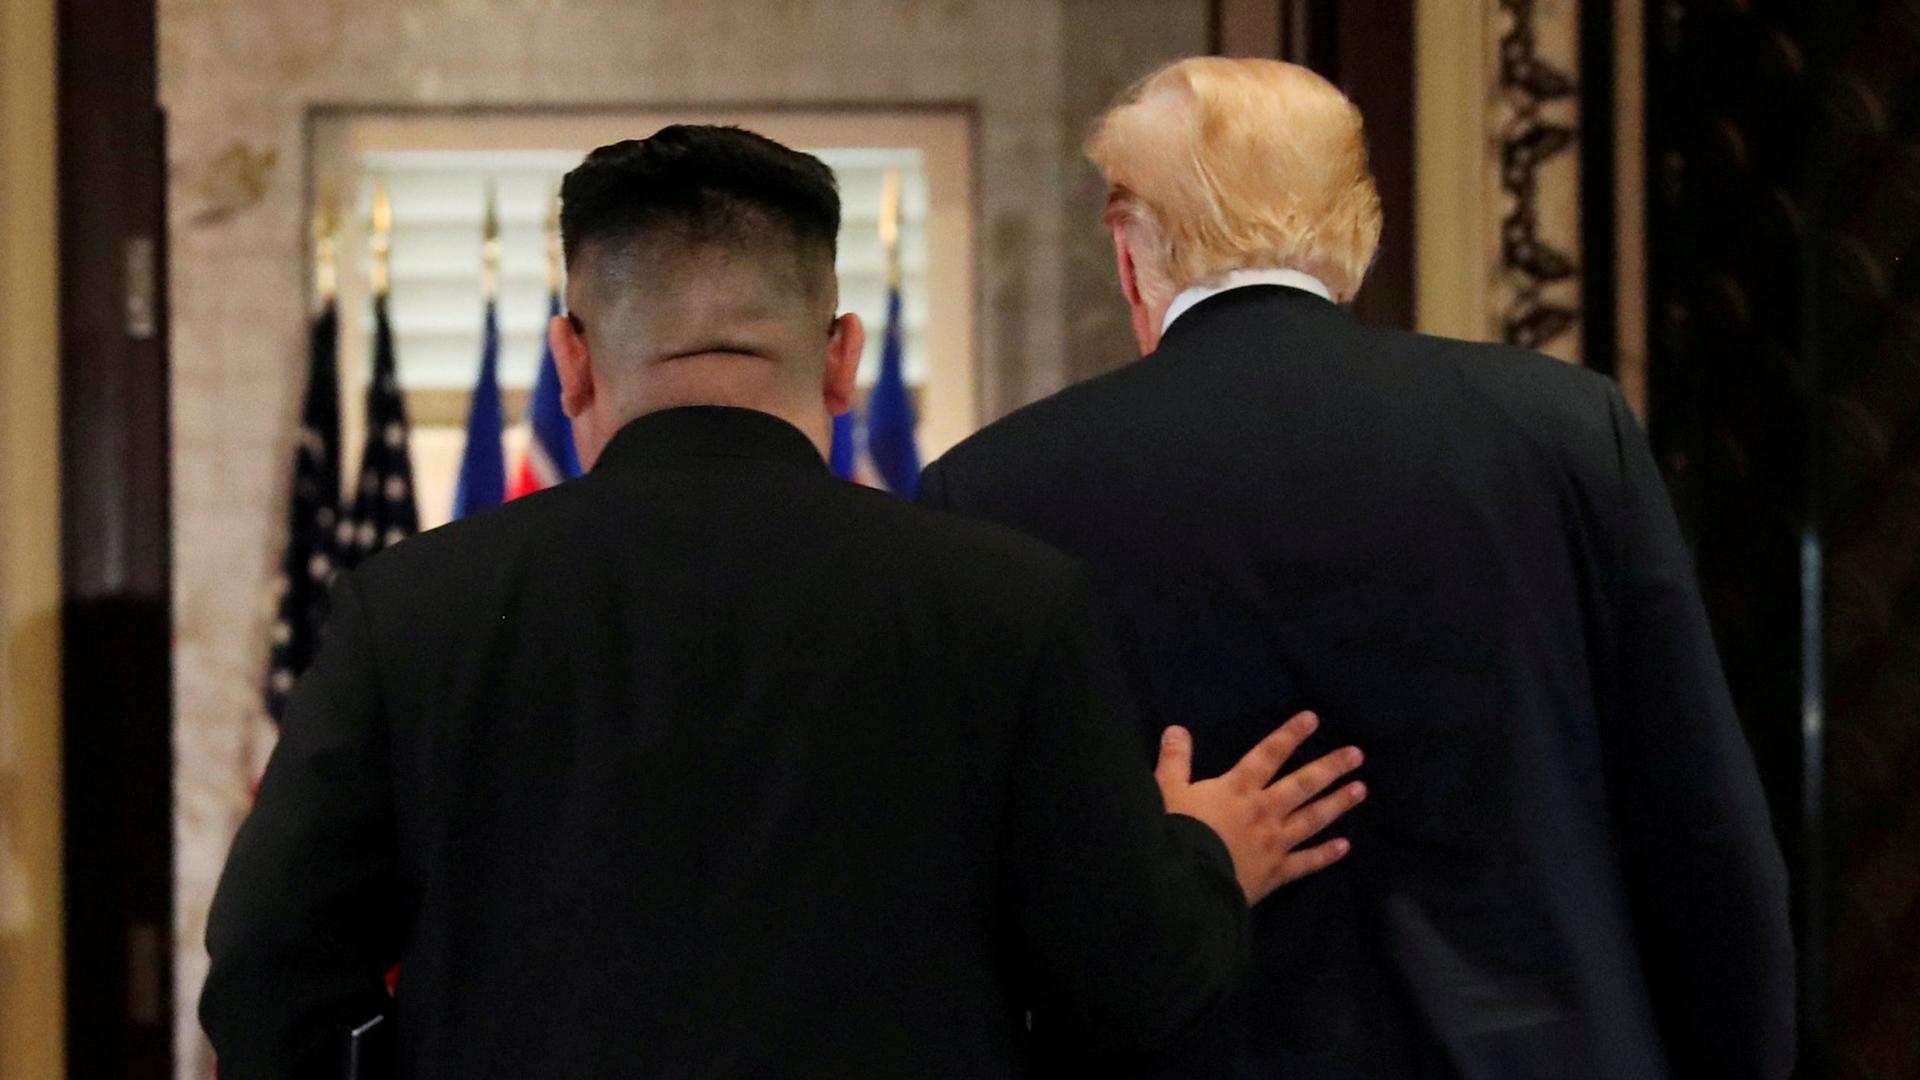 US President Donald Trump is seen walking next to North Korea's leader Kim Jong-un  who has his hand on Trump's back.